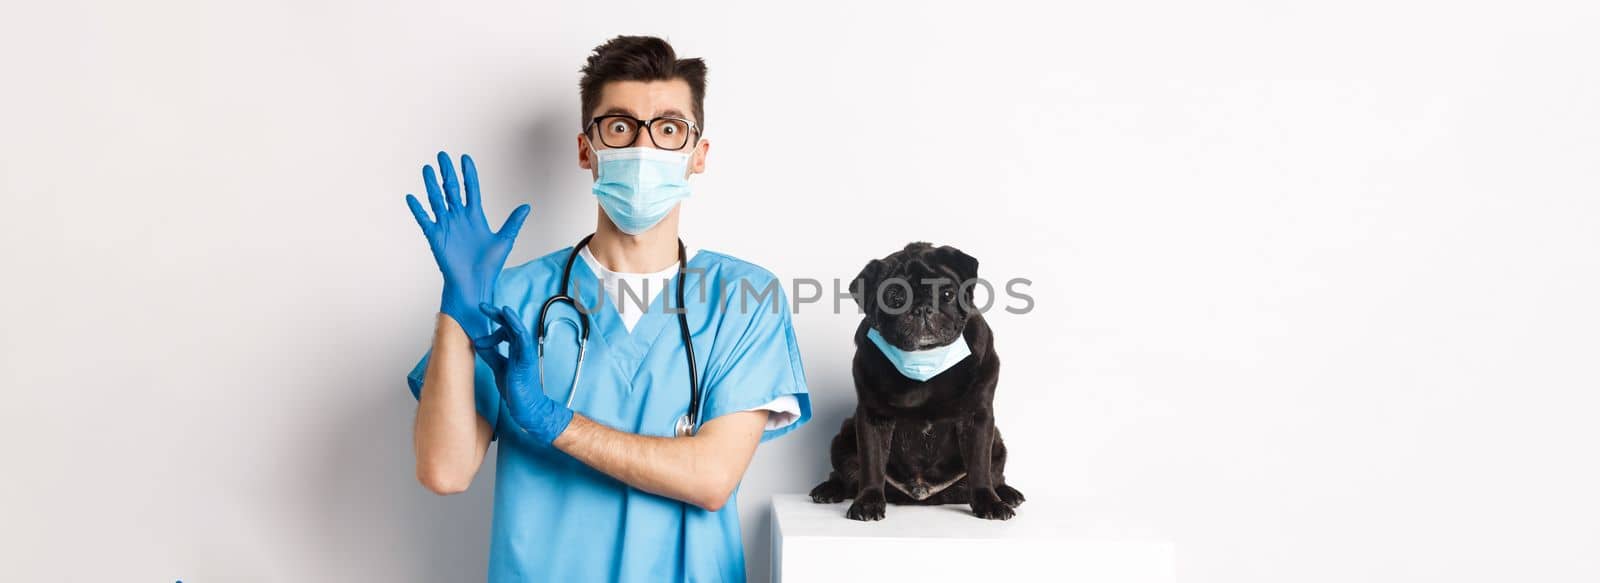 Funny black pug dog wearing medical mask, sitting near handsome veterinarian doctor putting on gloves for examination, white background.